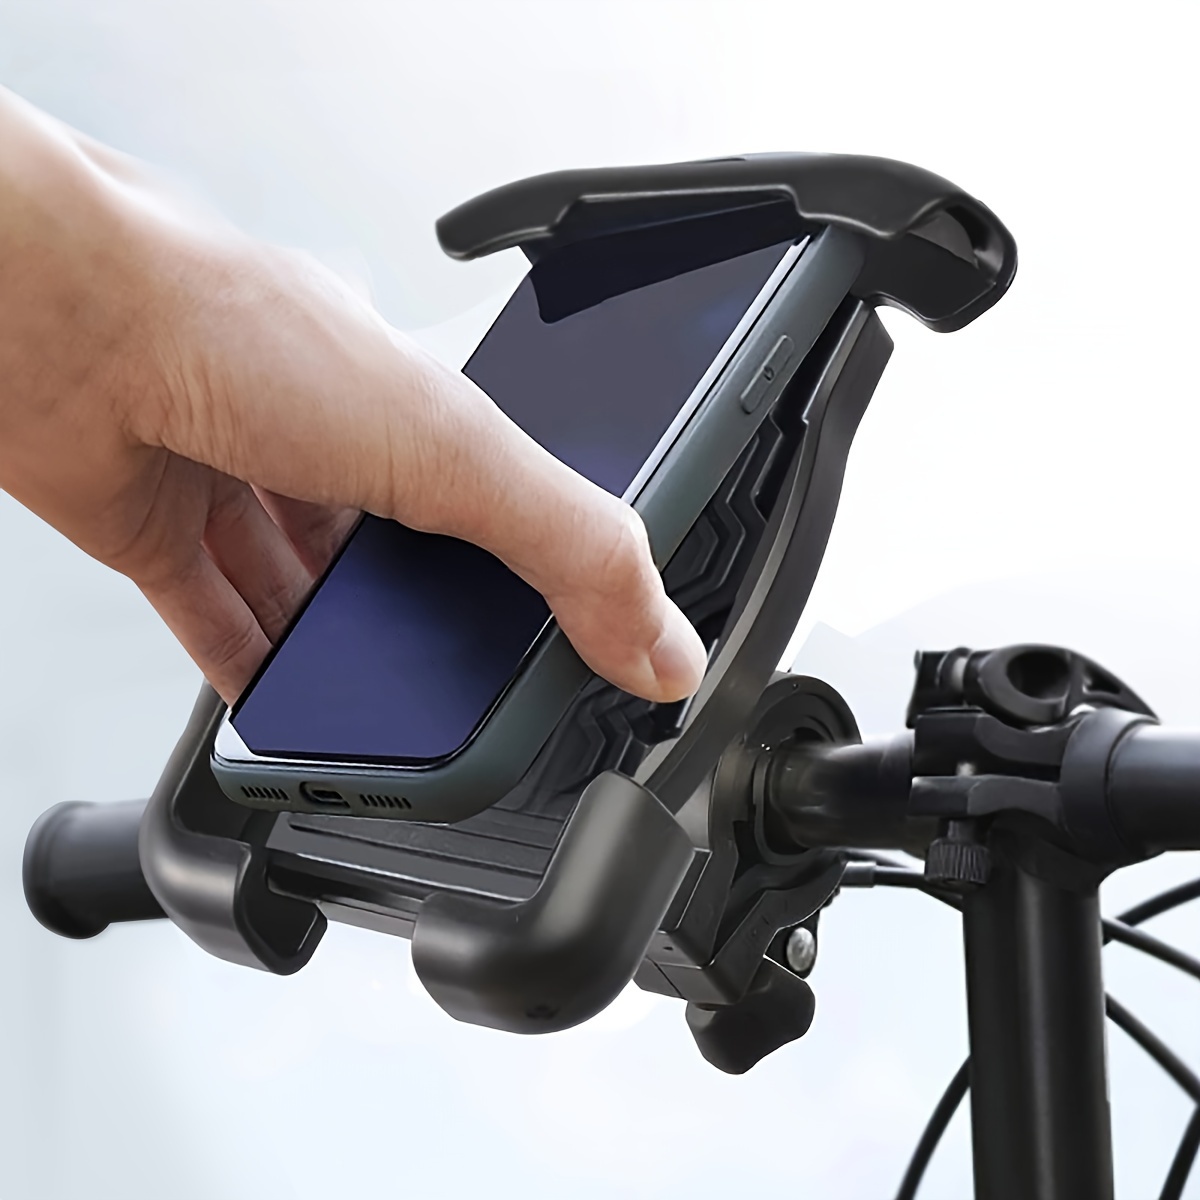 

Motorcycle & Bicycle Mobile Phone Holder - Securely Clip Your 14 Plus/promax, 13 Promax, S9, S10 & More 4.7-6.8 Smartphones!